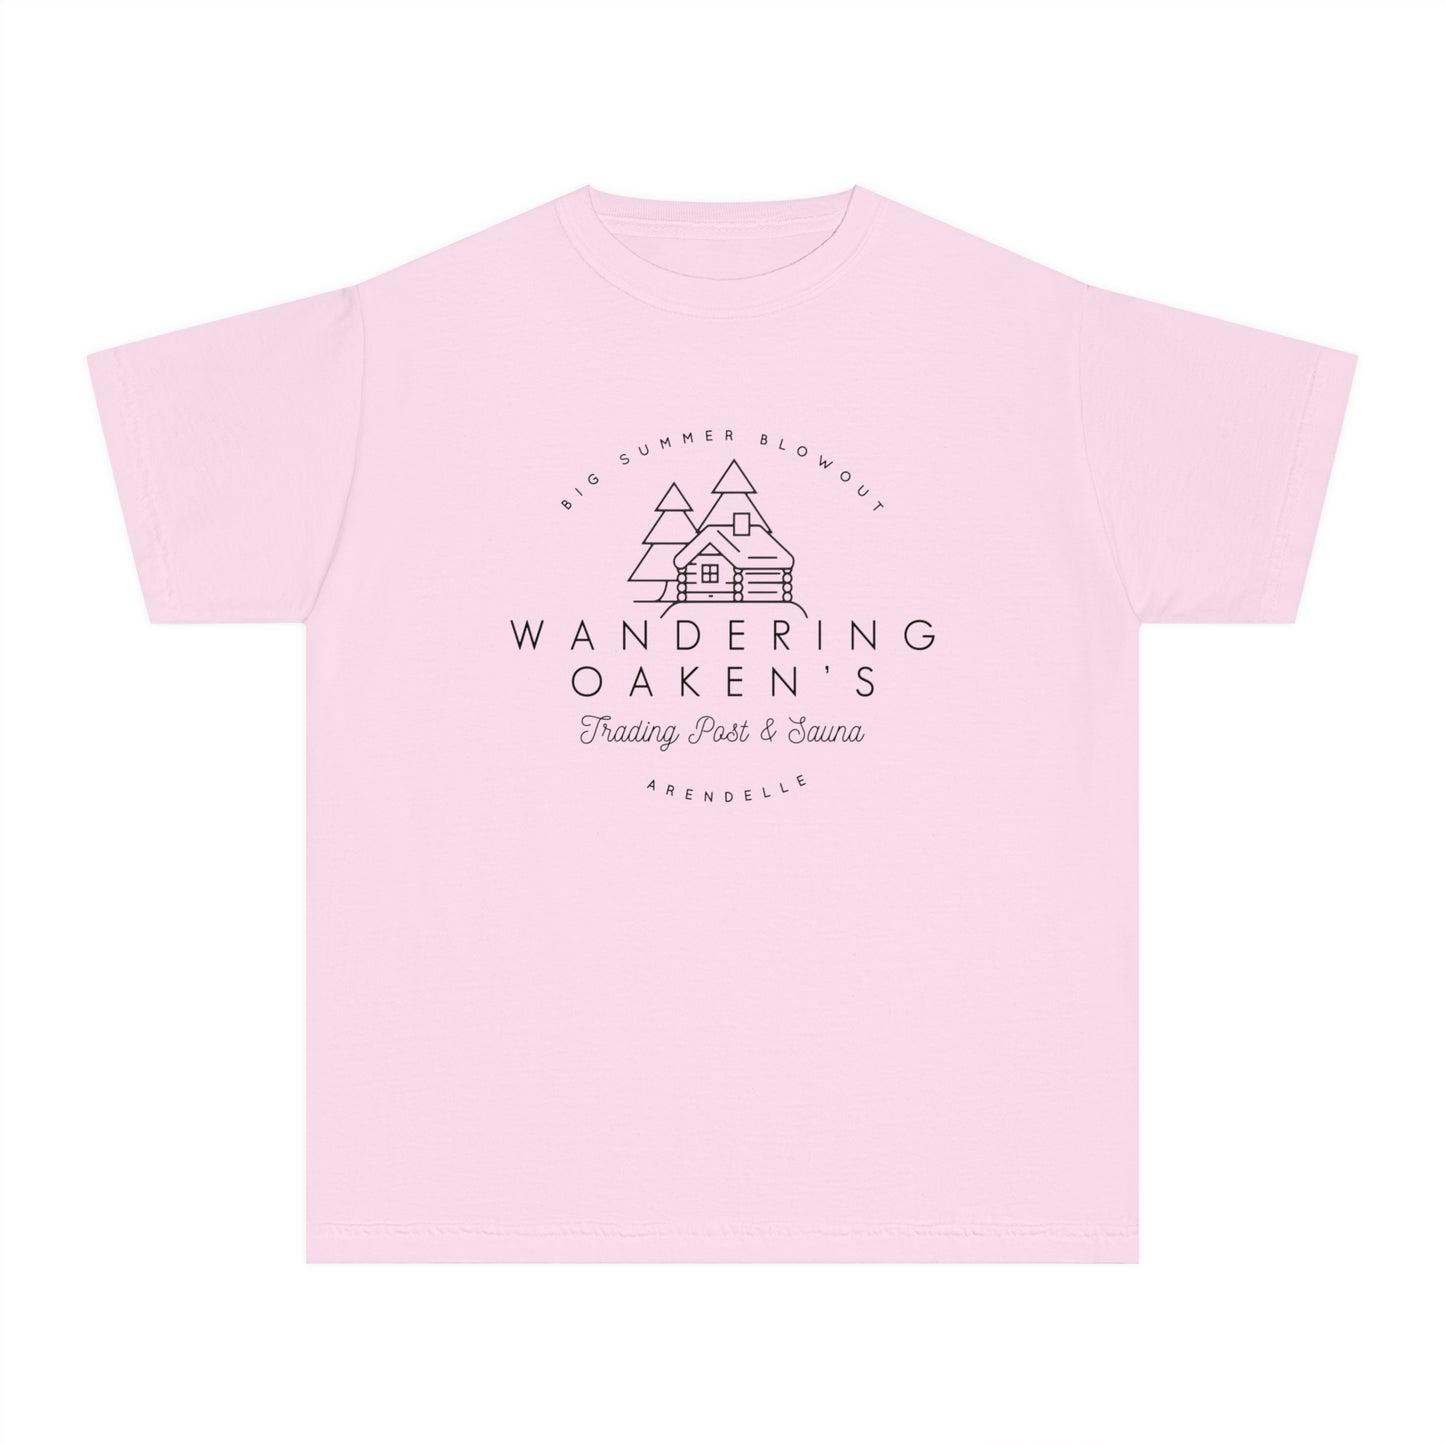 Wandering Oaken’s Trading Post Comfort Colors Youth Midweight Tee